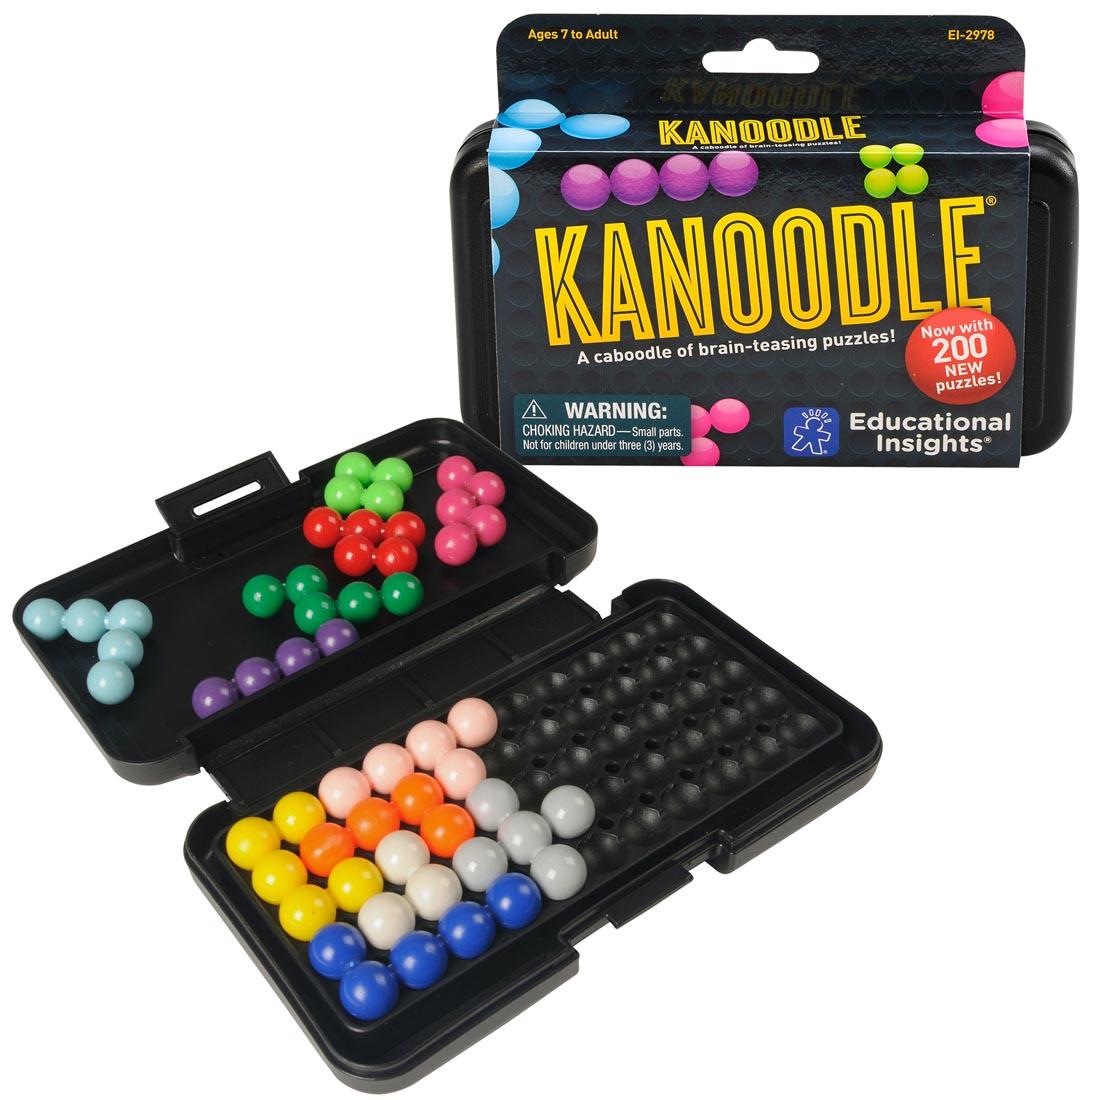 single player game-teaser puzzle Kanoodle in a black case